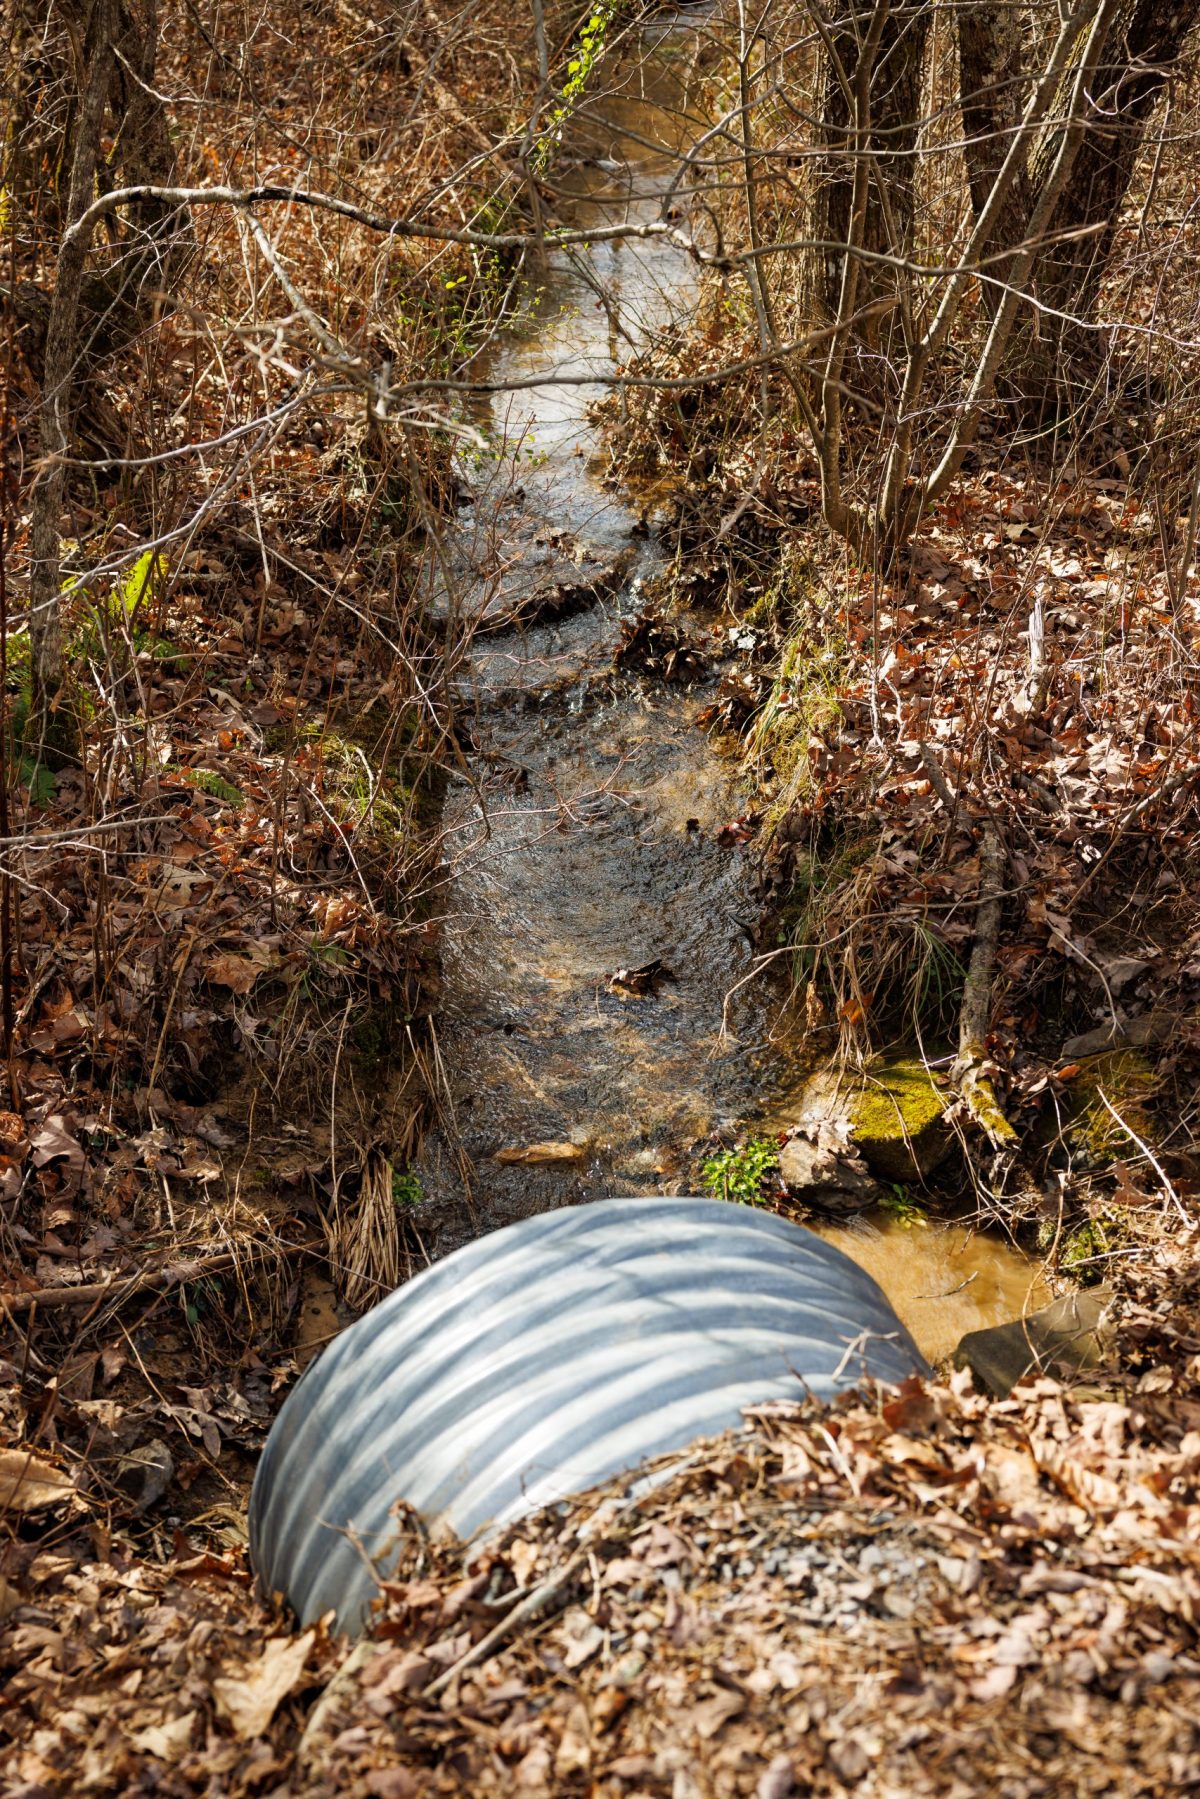 Water flows through a problematic culvert that does not allow for the passage of fish upstream.